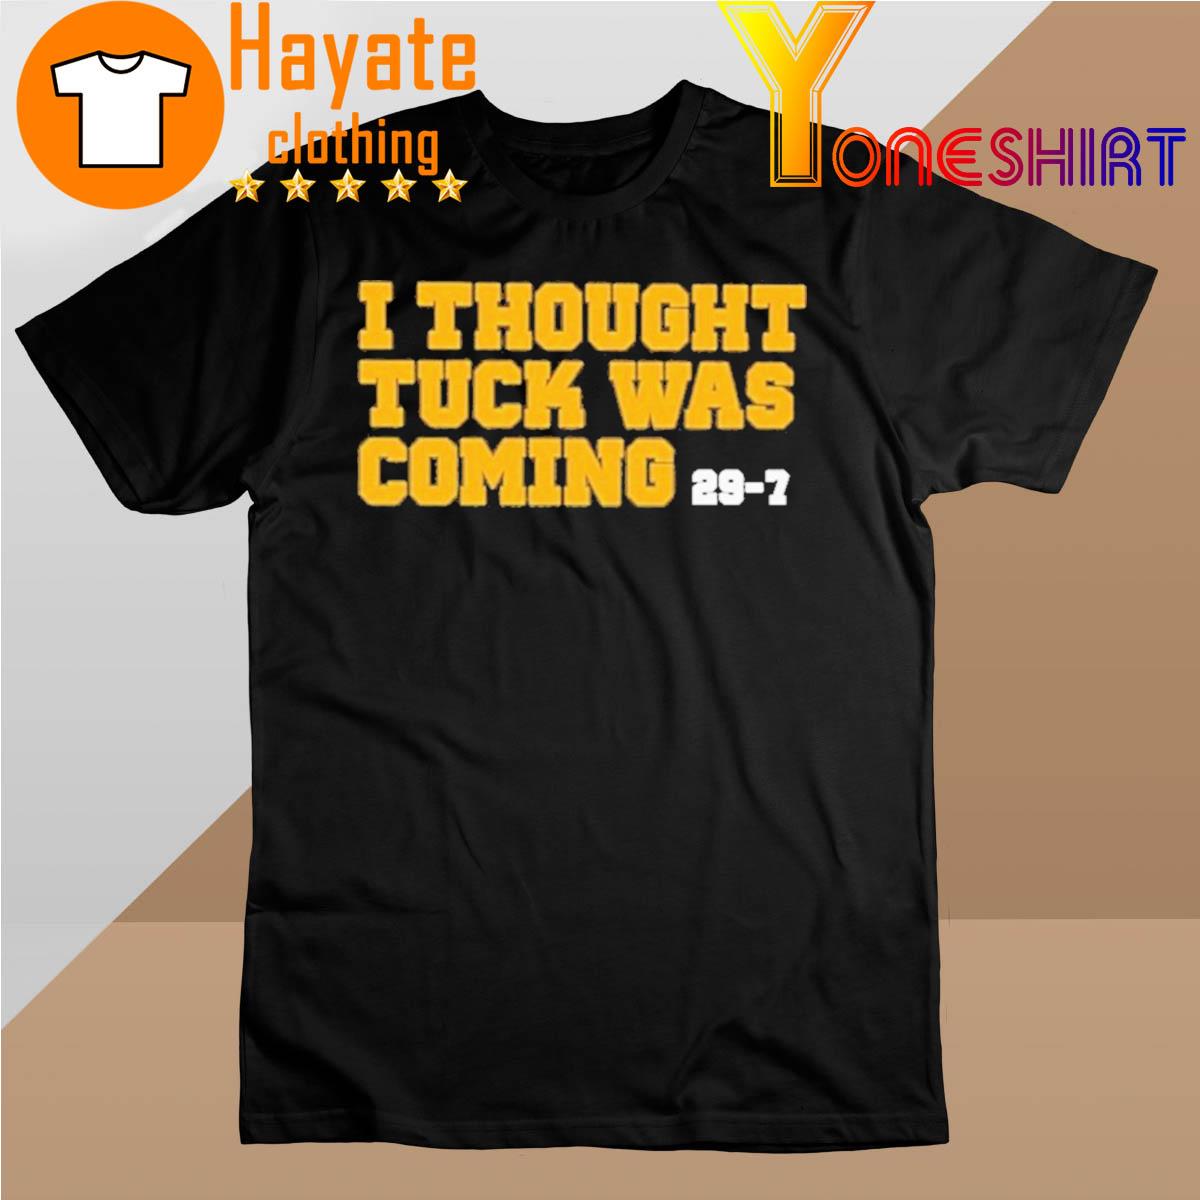 I Thought Tuck Was Coming 29-7 Shirt